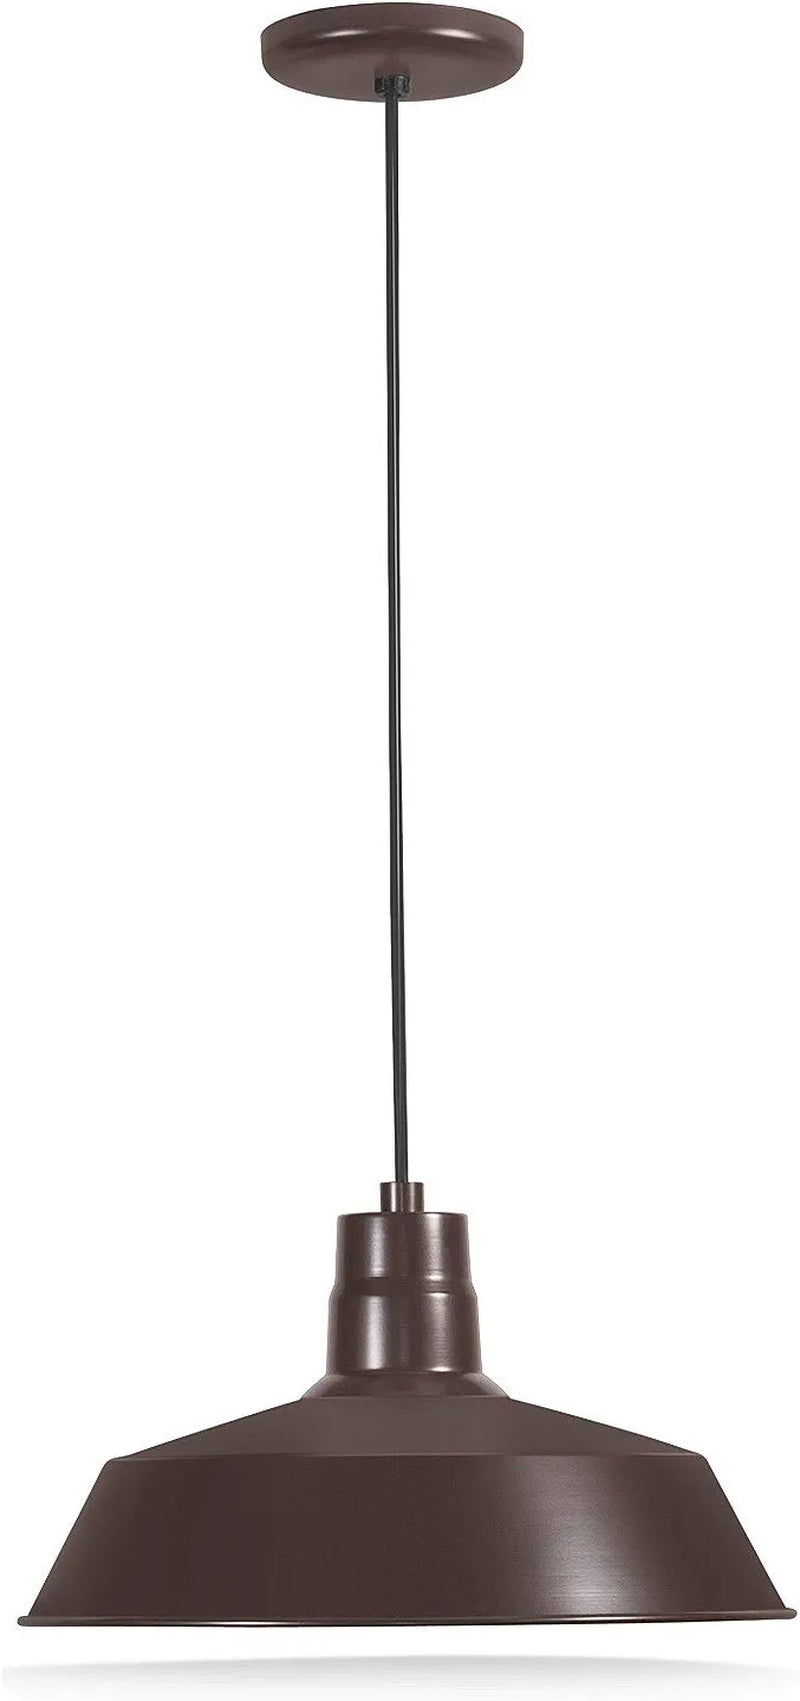 14-Inch Industrial Black Pendant Barn Light Fixture with 10Ft Adjustable Cord, Ceiling-Mounted Vintage Hanging Light Fixture for Indoor Use, 120V Hardwire, E26 Medium Base LED Compatible, UL Listed Home & Garden > Lighting > Lighting Fixtures HTM LIGHTING SOLUTIONS Architectural Bronze 1-Pack 